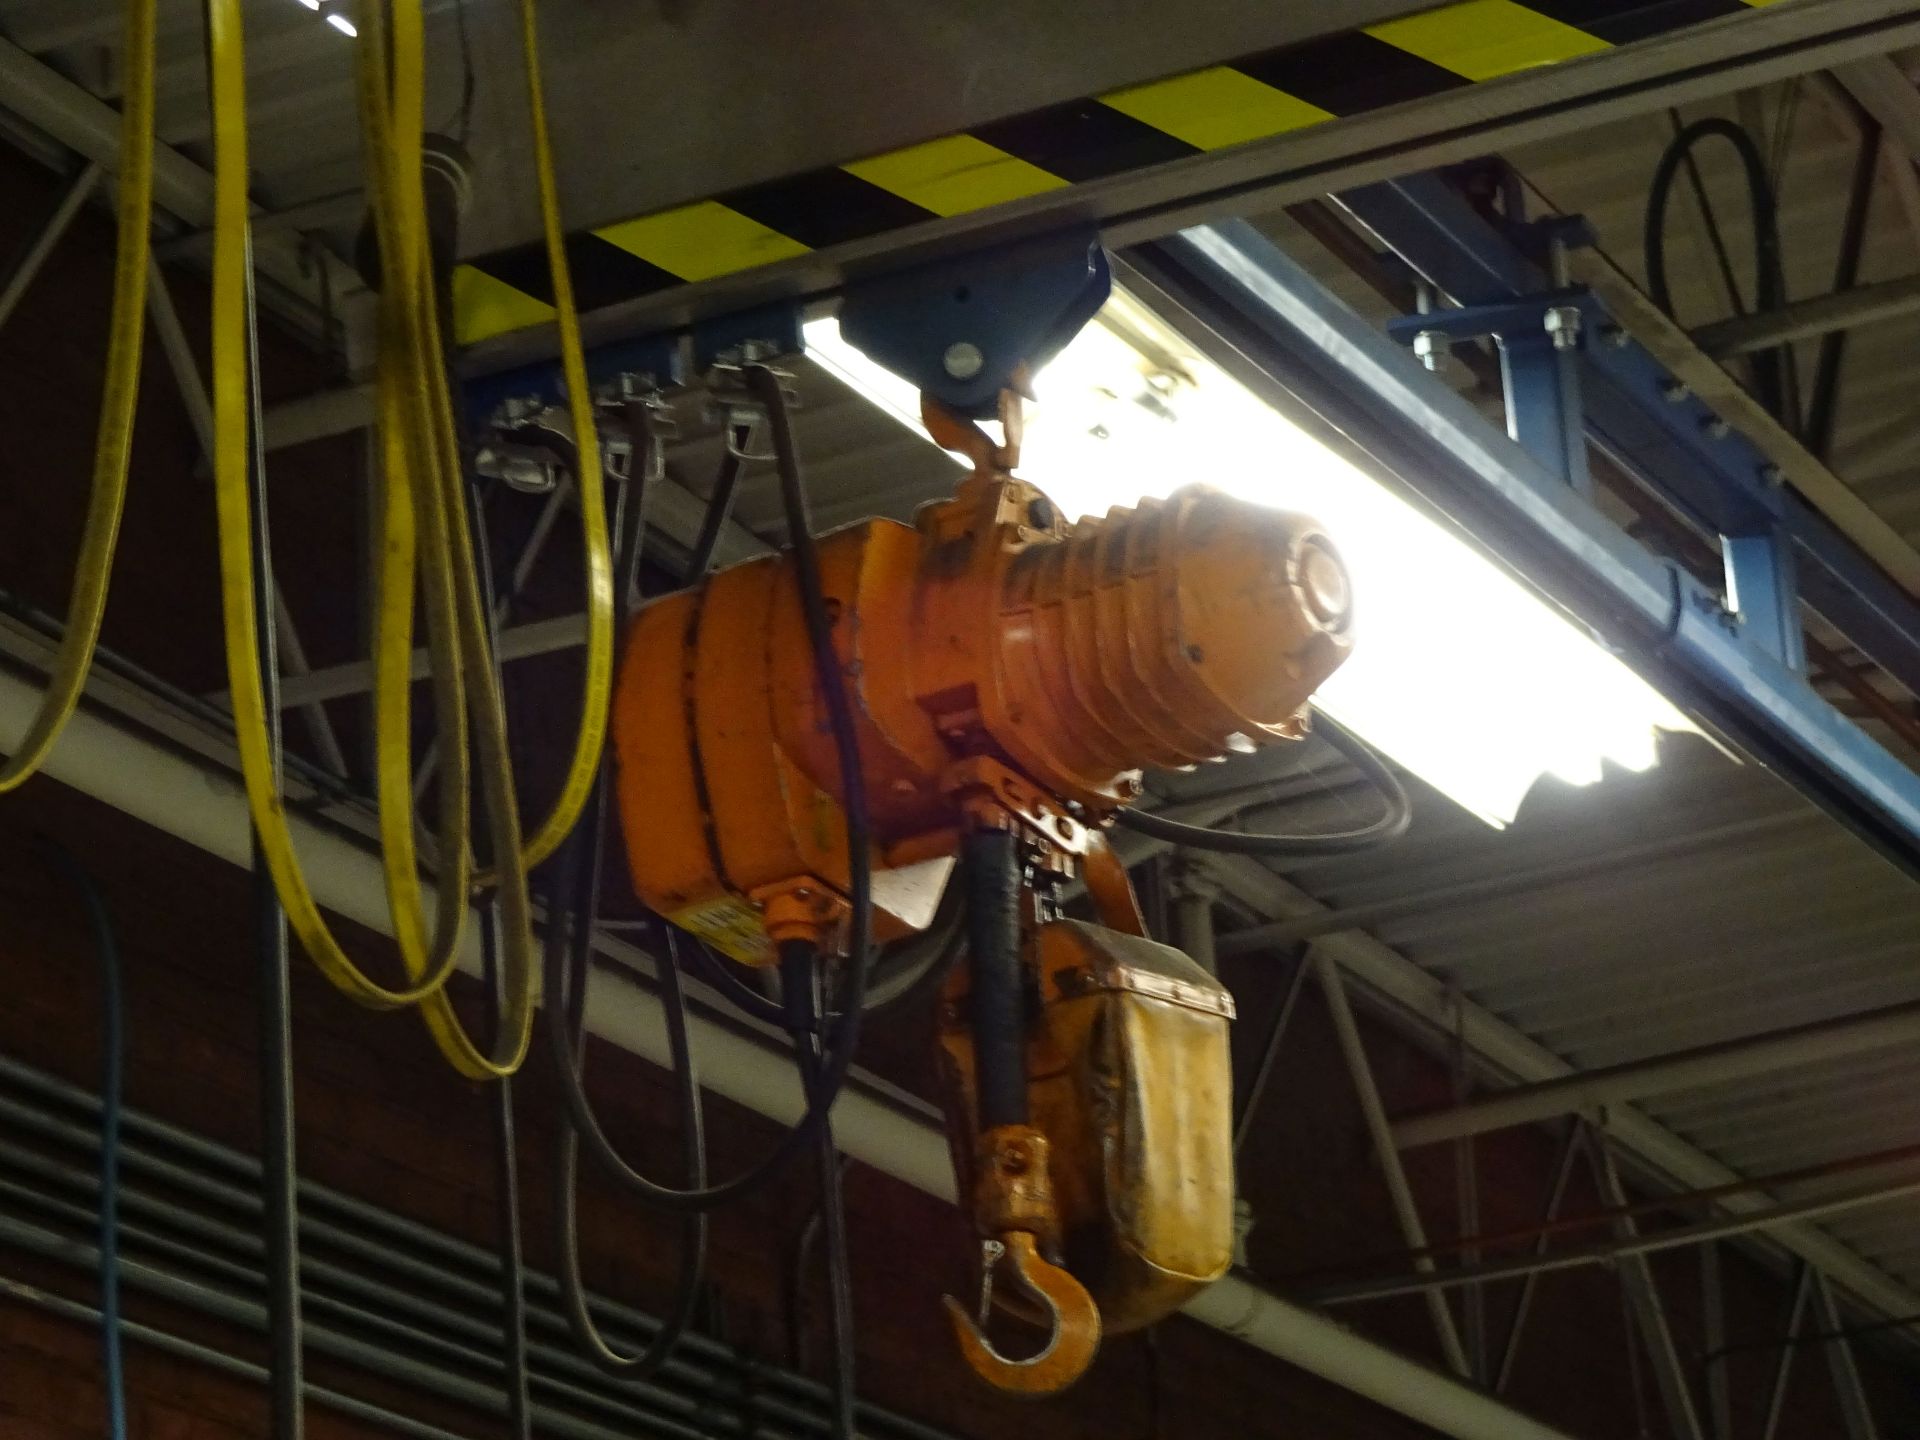 500 LB. X 20' GORBEL CEILING HUNG OVERHEAD CRANE WITH 500 LB. INGERSOLL RAND ELECTRIC CHAIN HOIST - Image 2 of 4